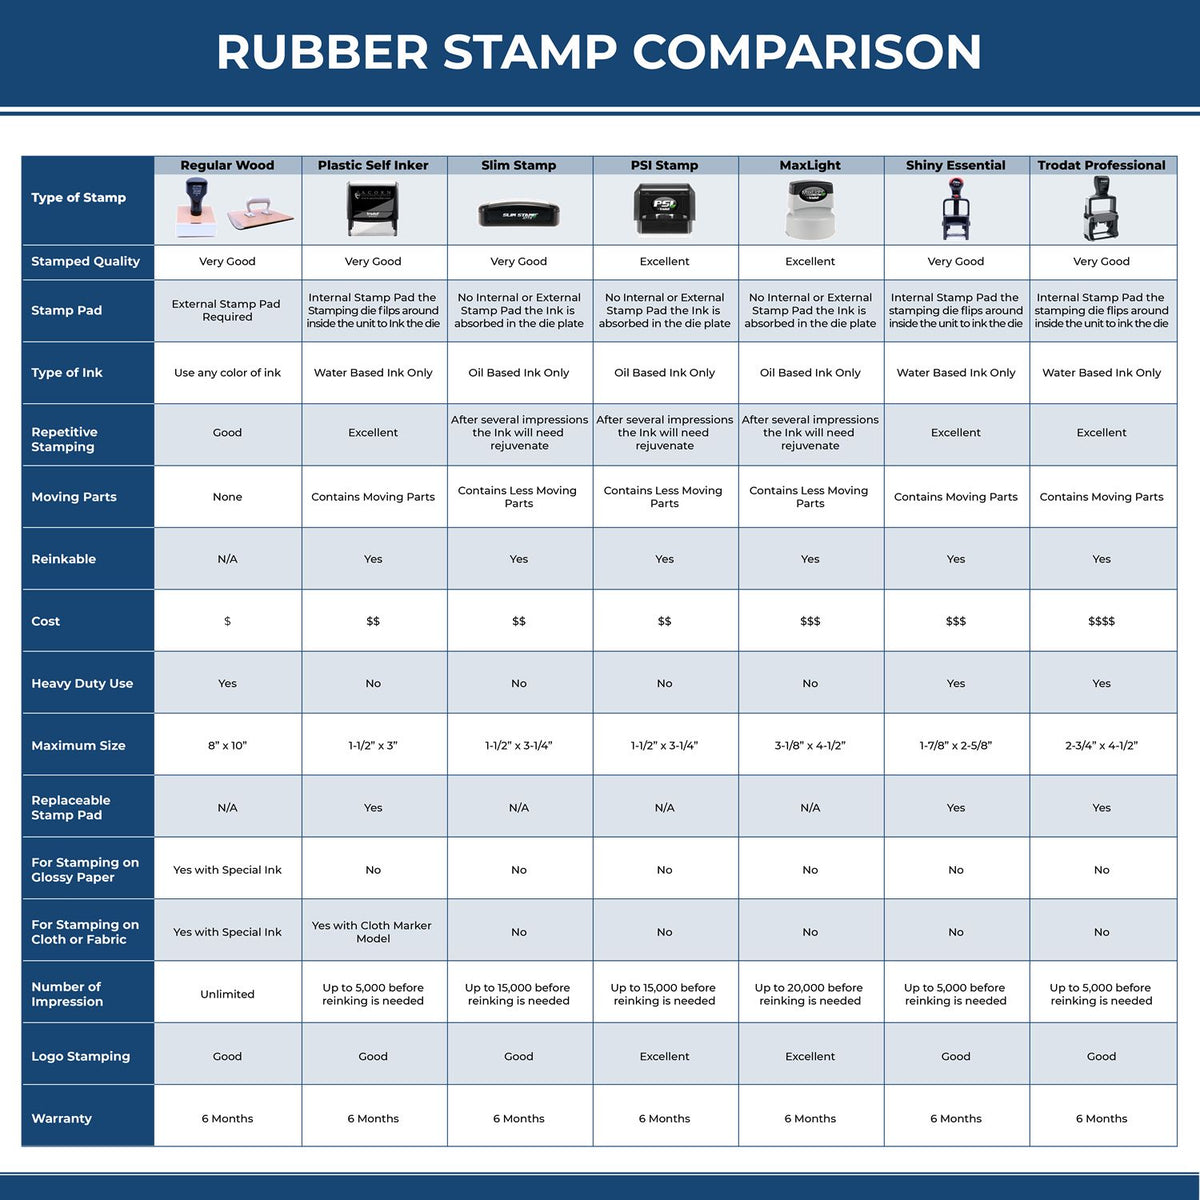 A comparison chart for the different types of mount models available for the Premium MaxLight Pre-Inked Oklahoma Landscape Architectural Stamp.